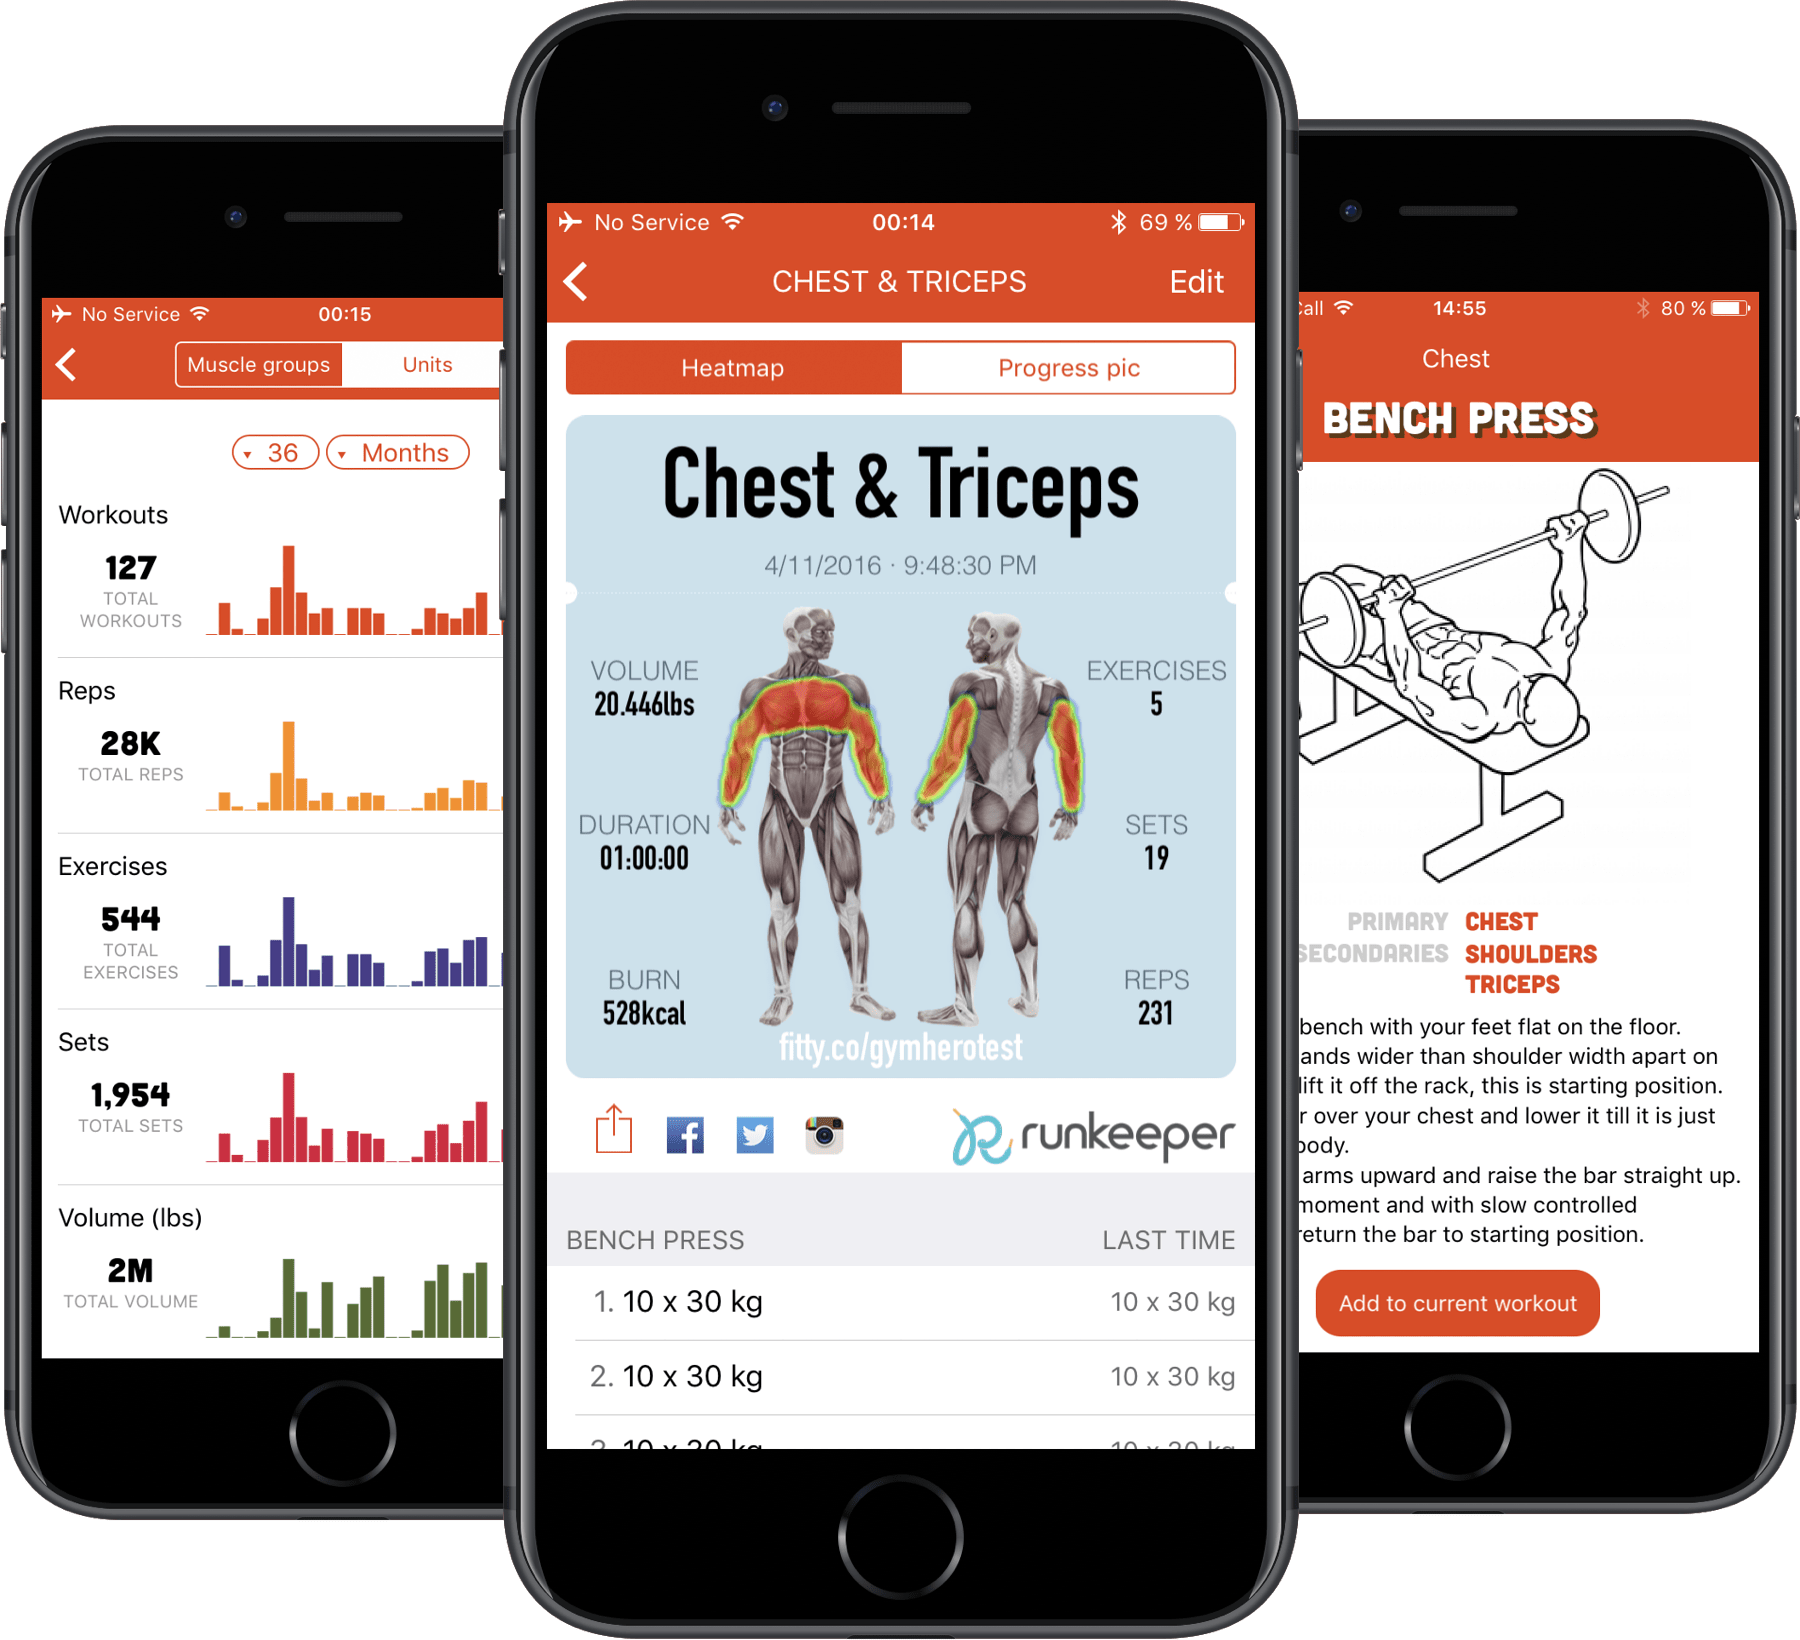 5 Day Best Workout Routine App Reddit for Burn Fat fast